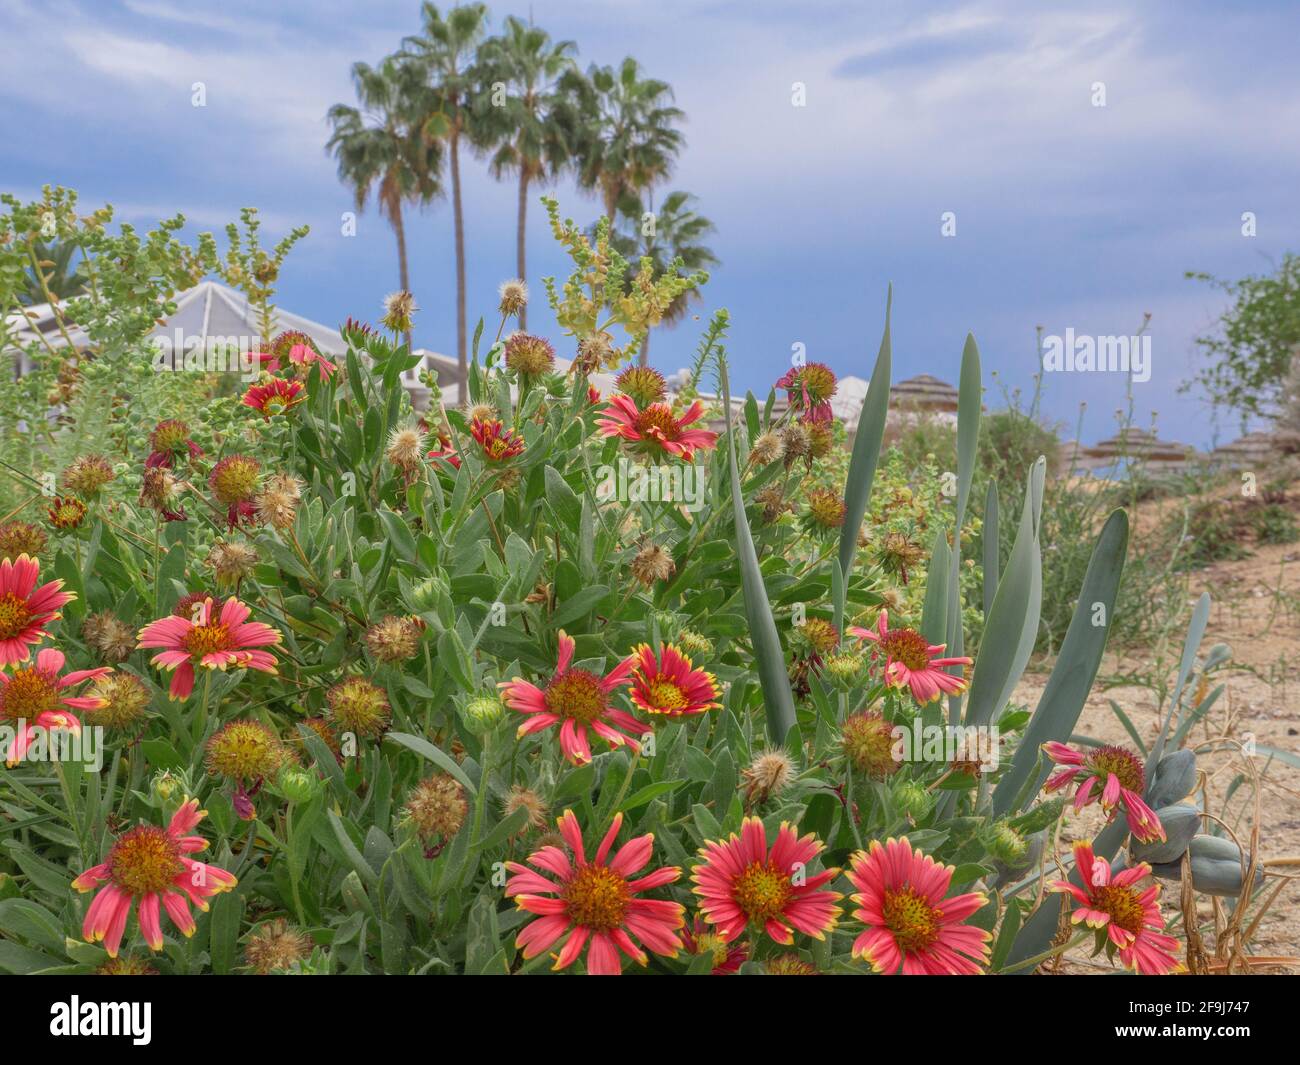 Blanketflowers (Gaillardia aristata) with red and yellow petals bloom in near Mediterranean sea on Nissi beach in Ayia Napa. High palm trees behind. Stock Photo